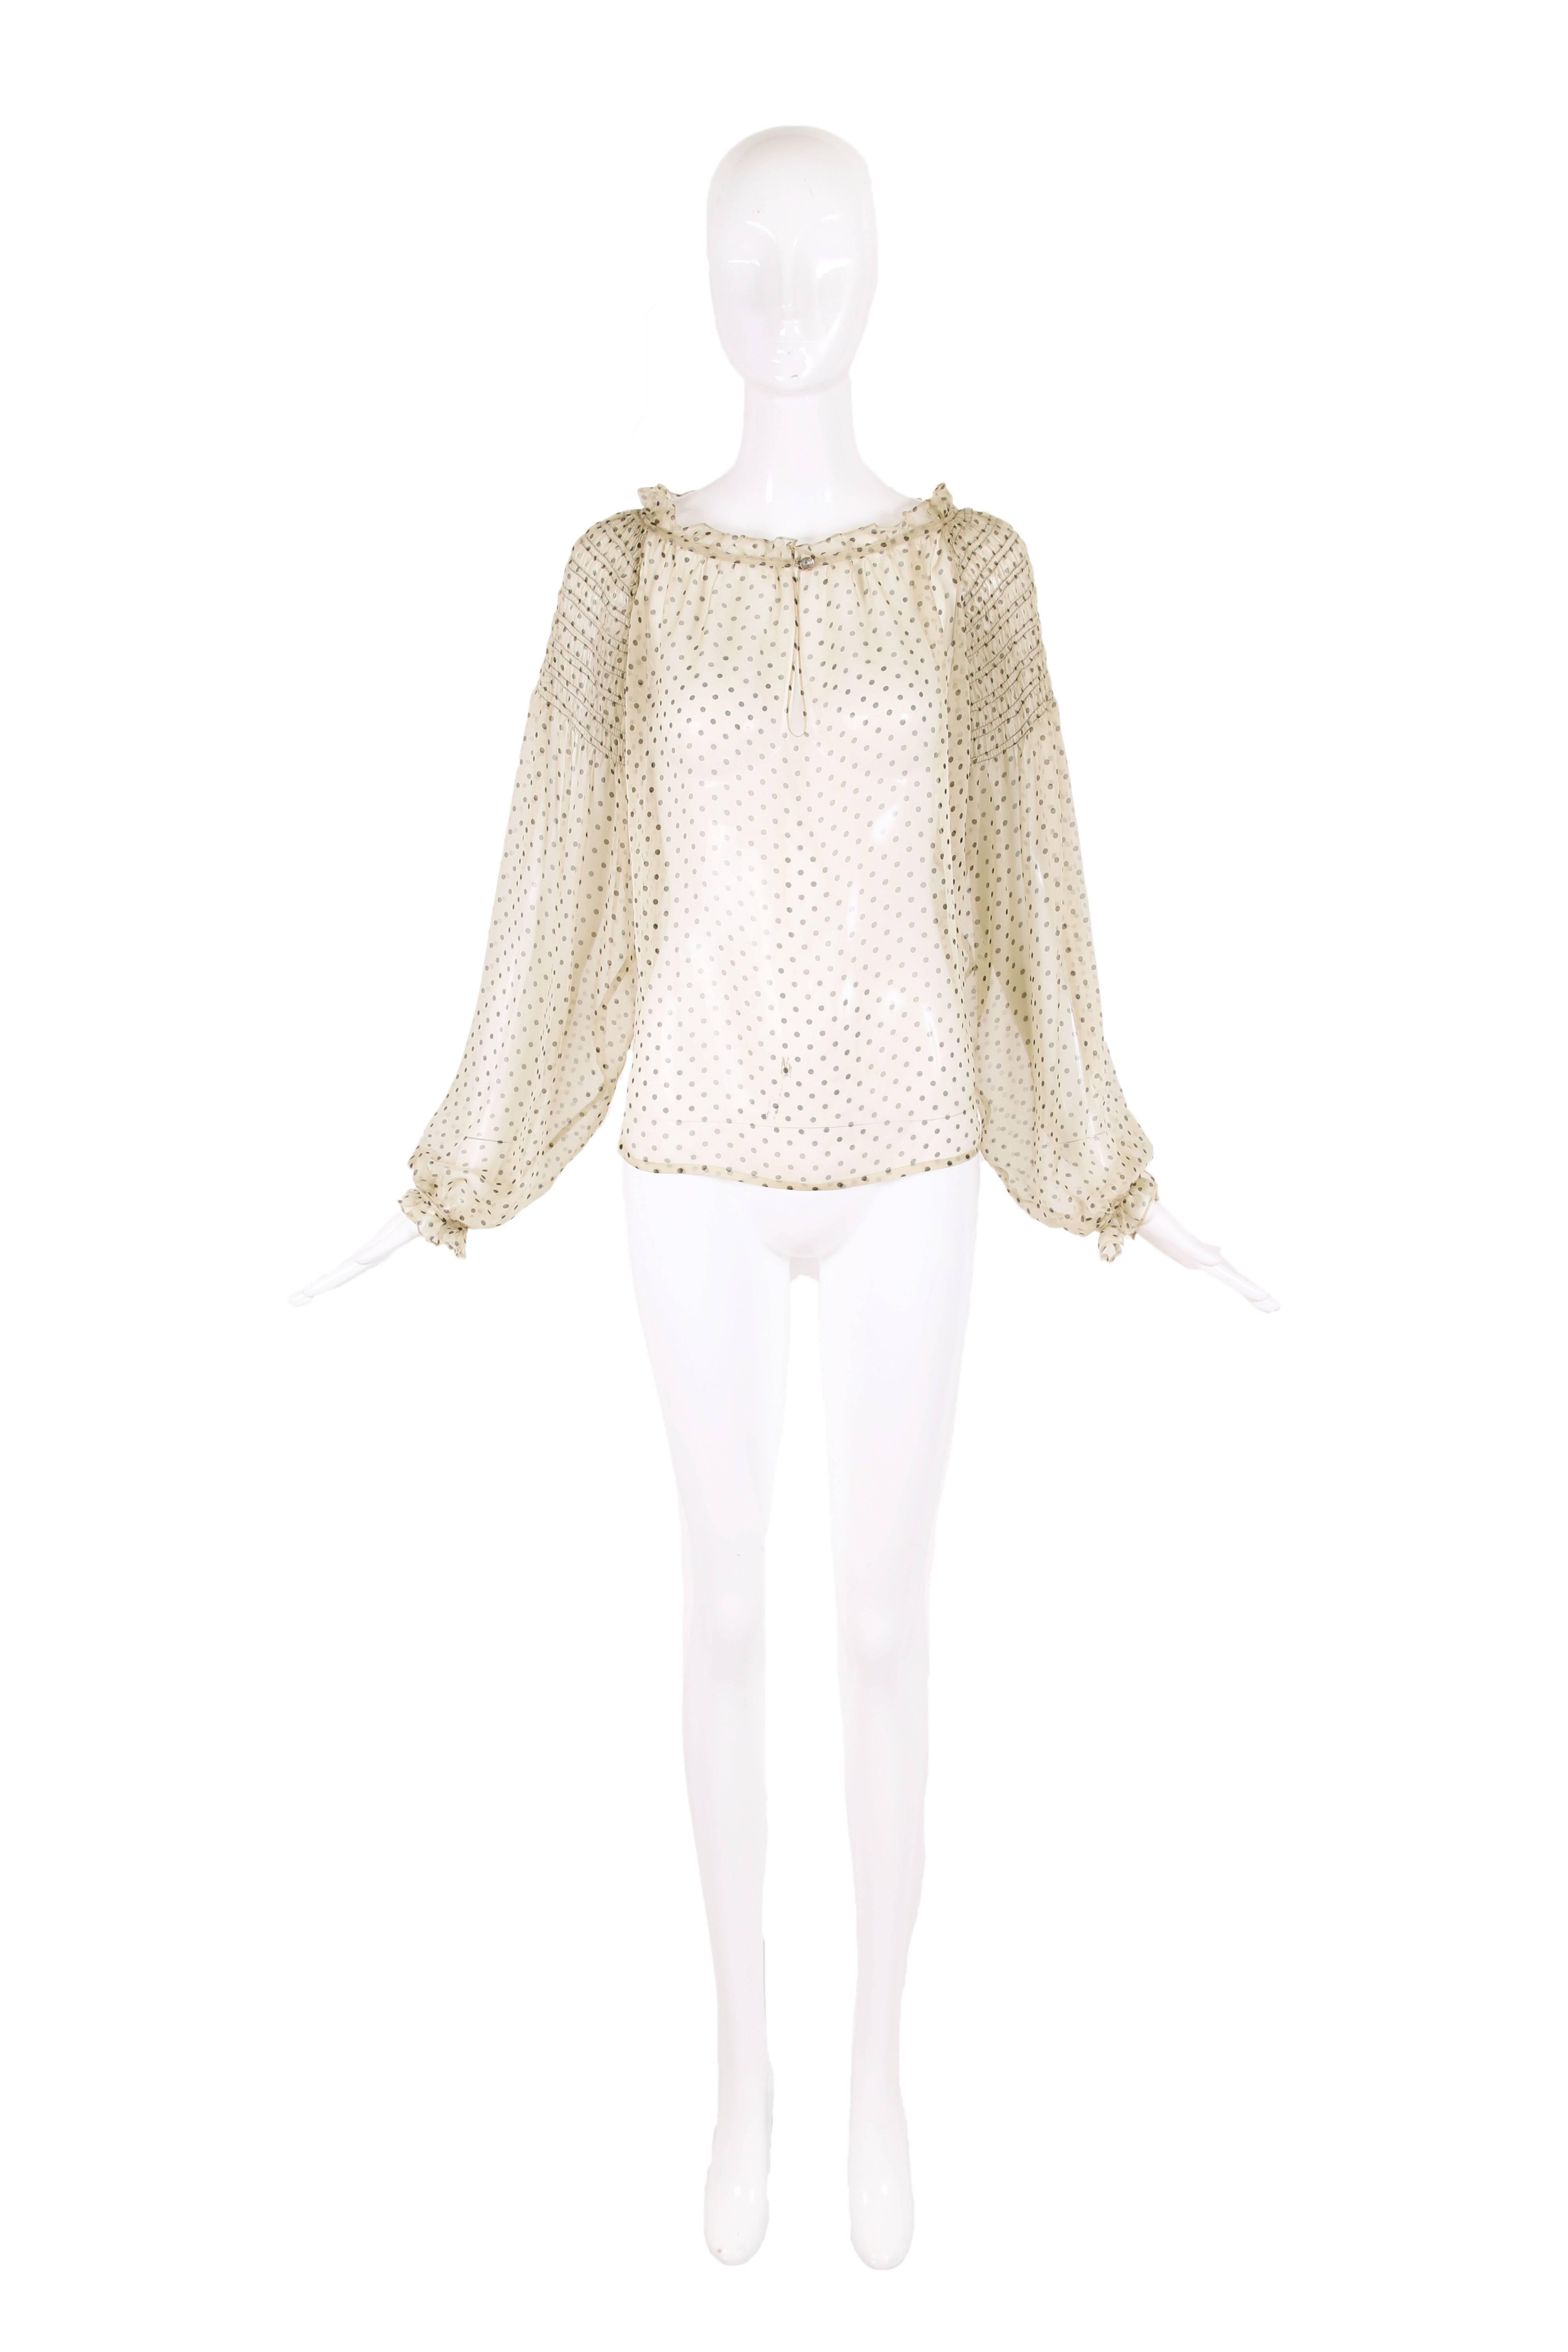 Loulou de la Falaise sheer 100% silk chiffon peasant style blouse in pale yellow with black polka dots, rouching detail at the shoulders, ruffle trim at sleeves and neckline. In excellent condition with a tiny orange-ish mark at the neckline and